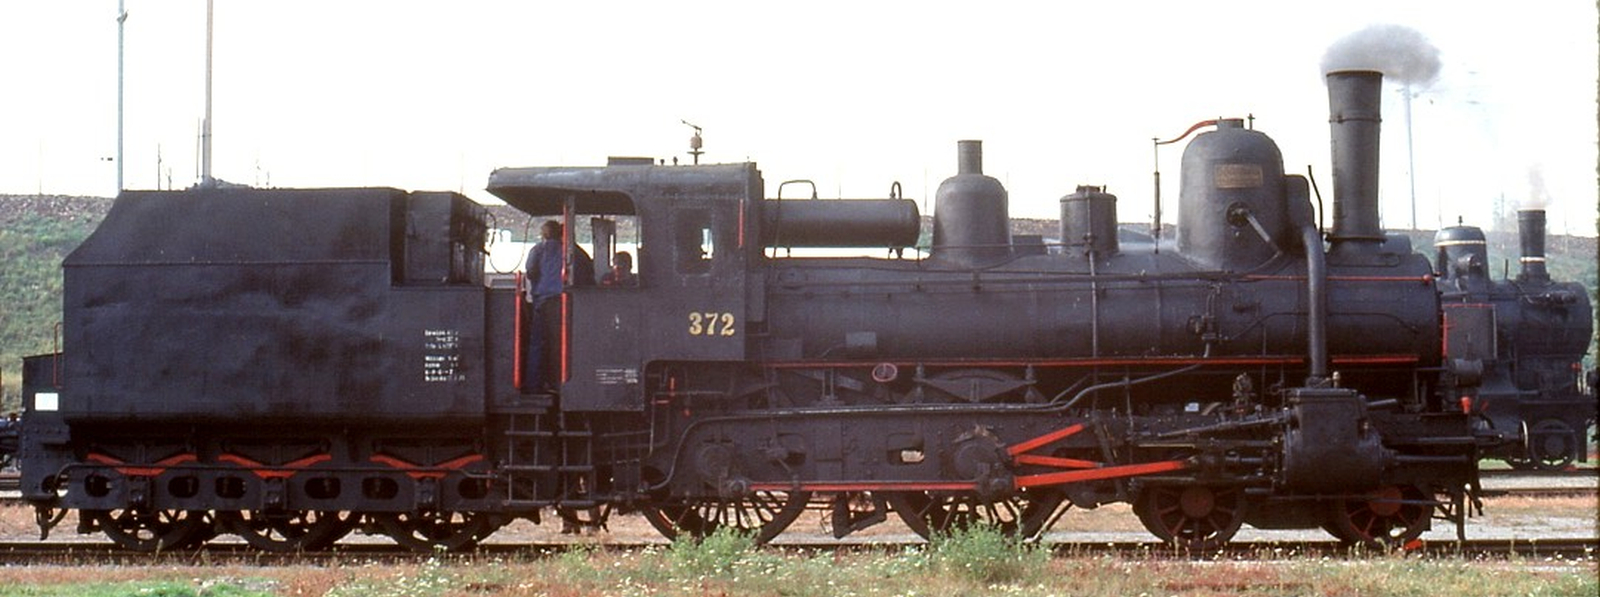 Class 17c No. 372 in October 1977 at the ÖBB open day